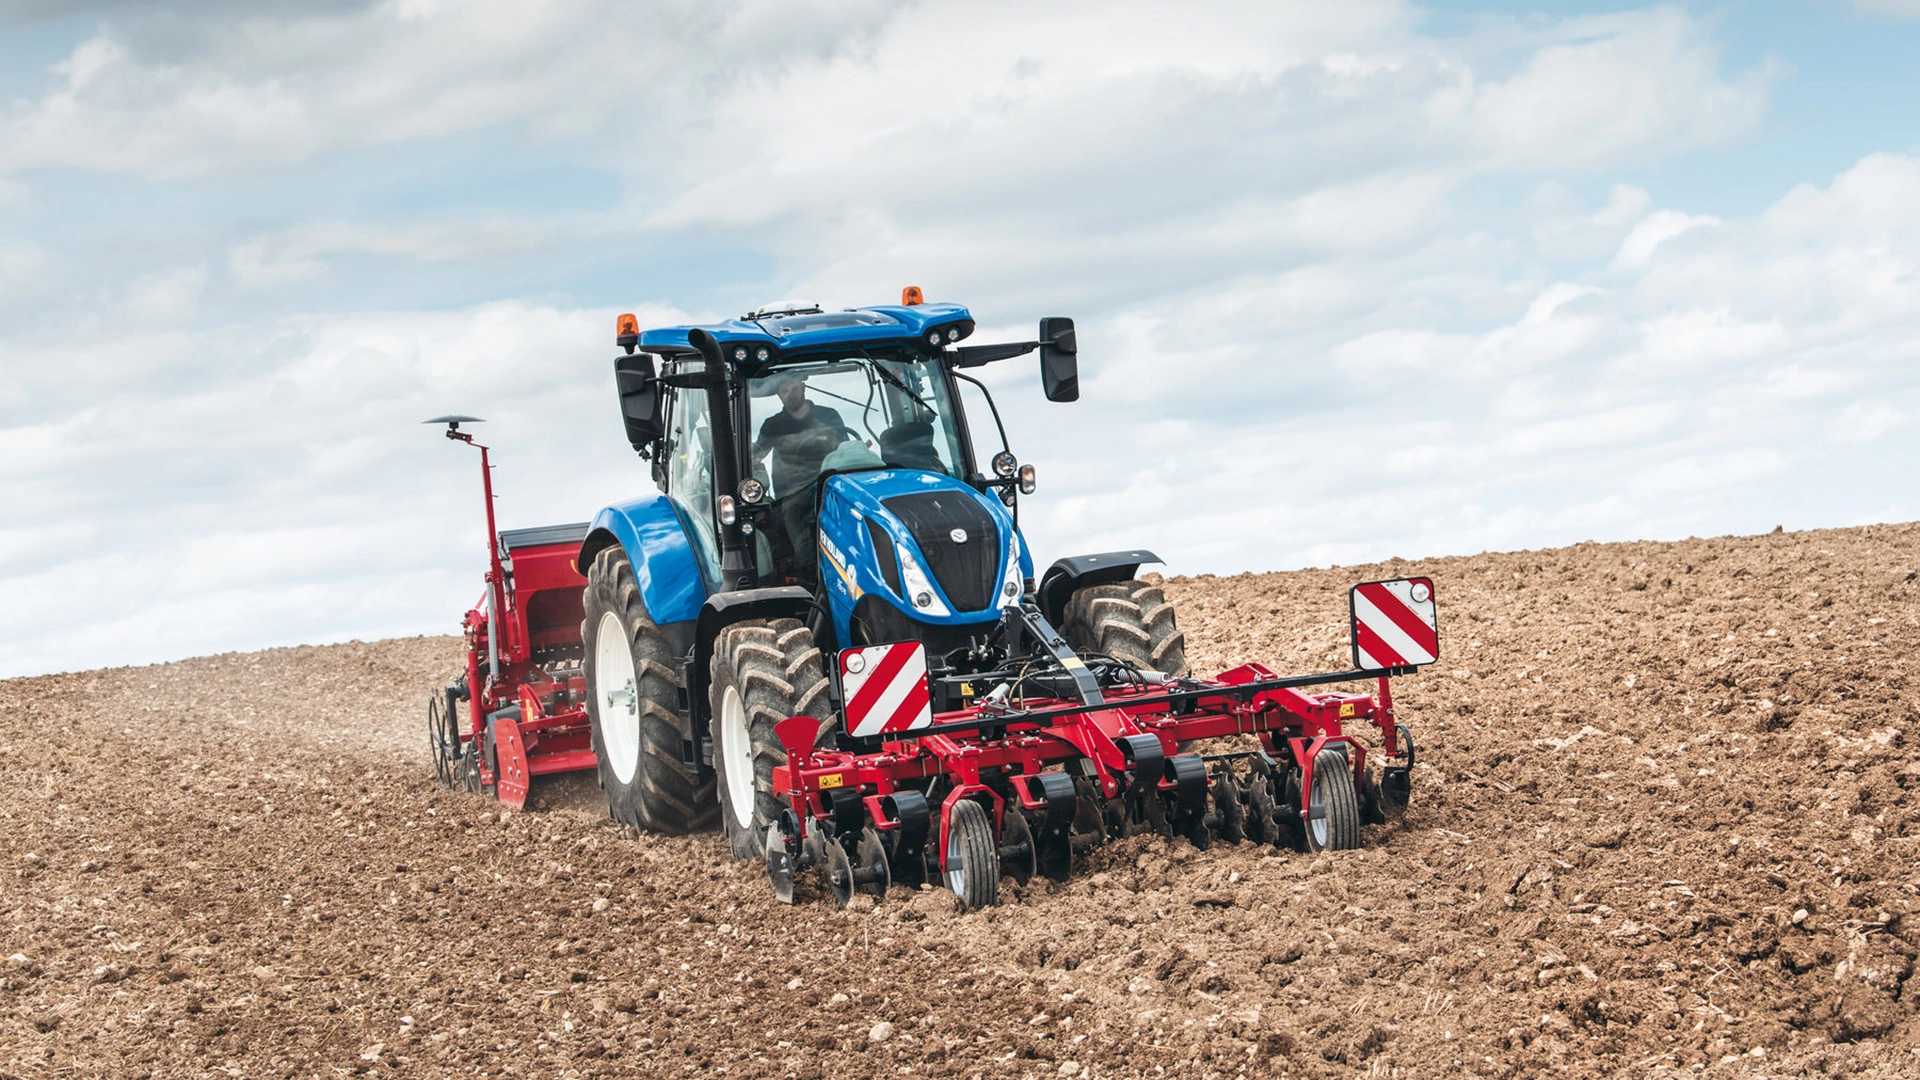 T5 Dynamic Command & Auto Command tractor actively engaged in agricultural field work